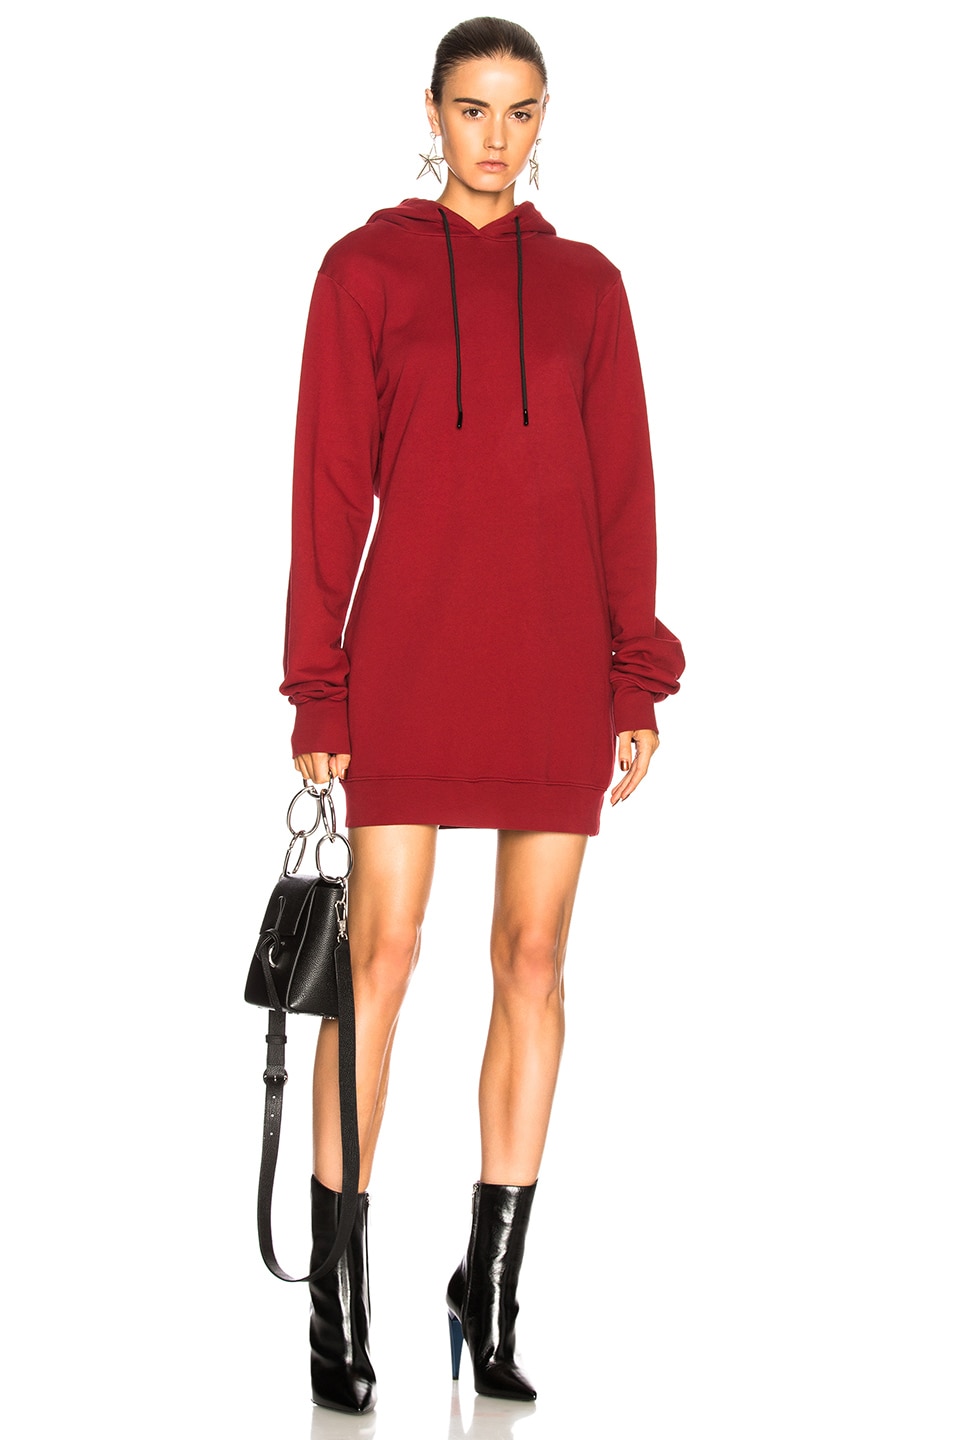 Image 1 of COTTON CITIZEN for FWRD Milan Backless Hoodie Dress in Fire Truck Red